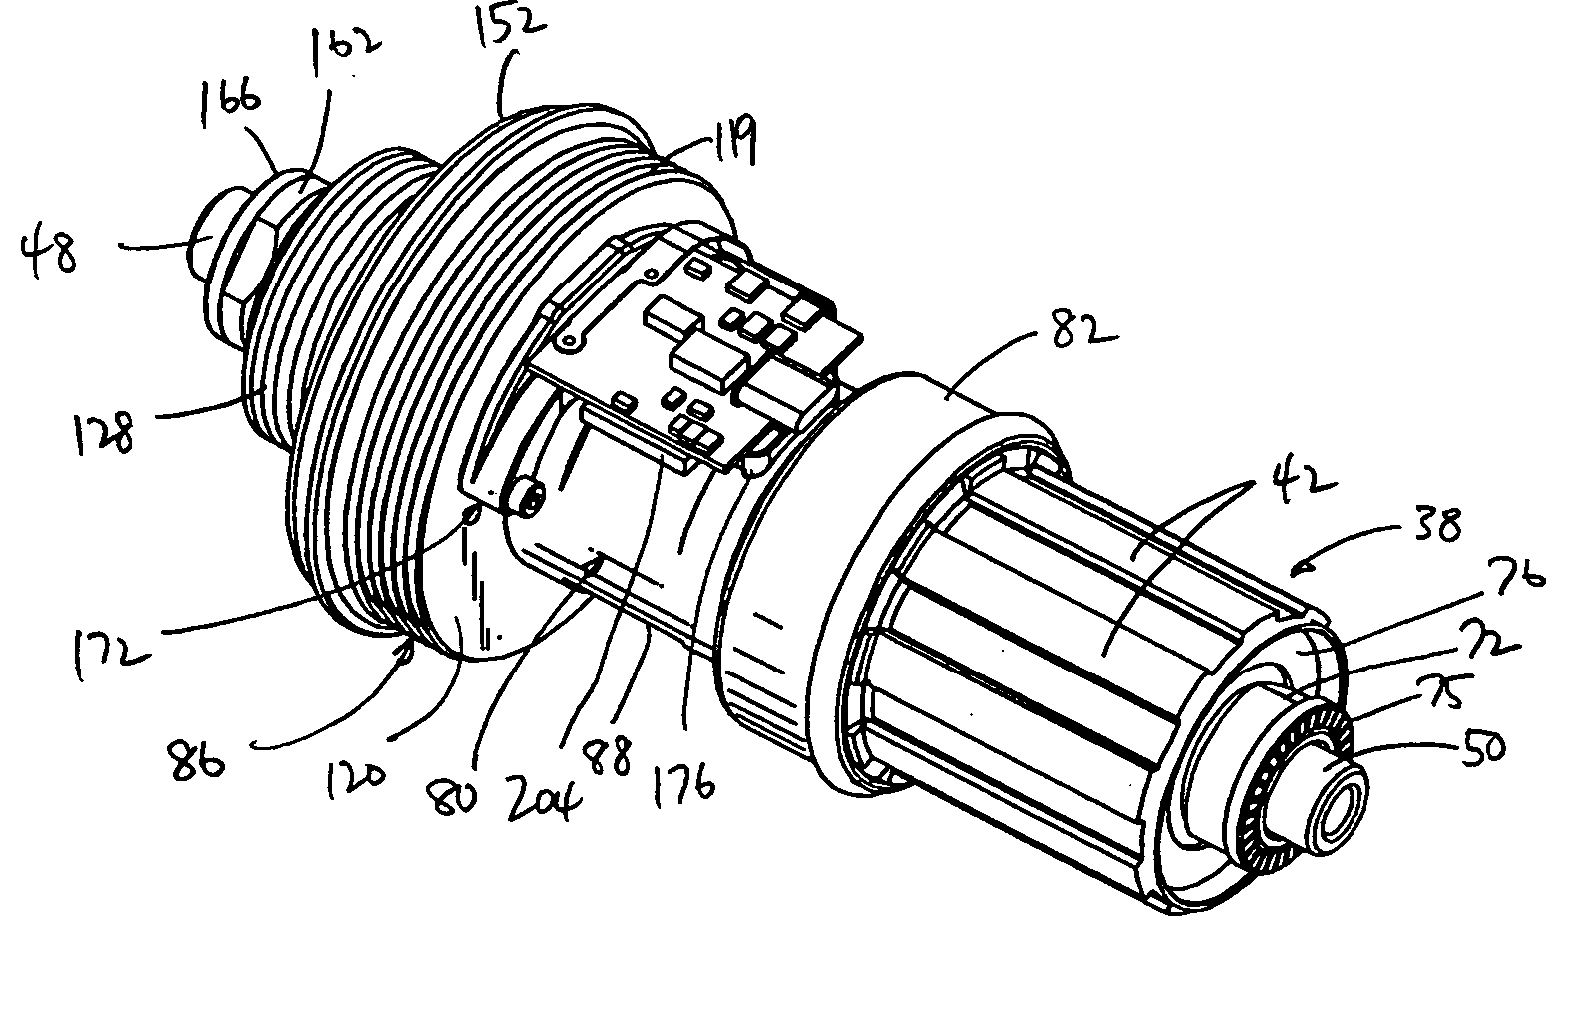 Enclosed operating characteristic sensor for a bicycle component including an emitter for emitting an operating characteristic signal